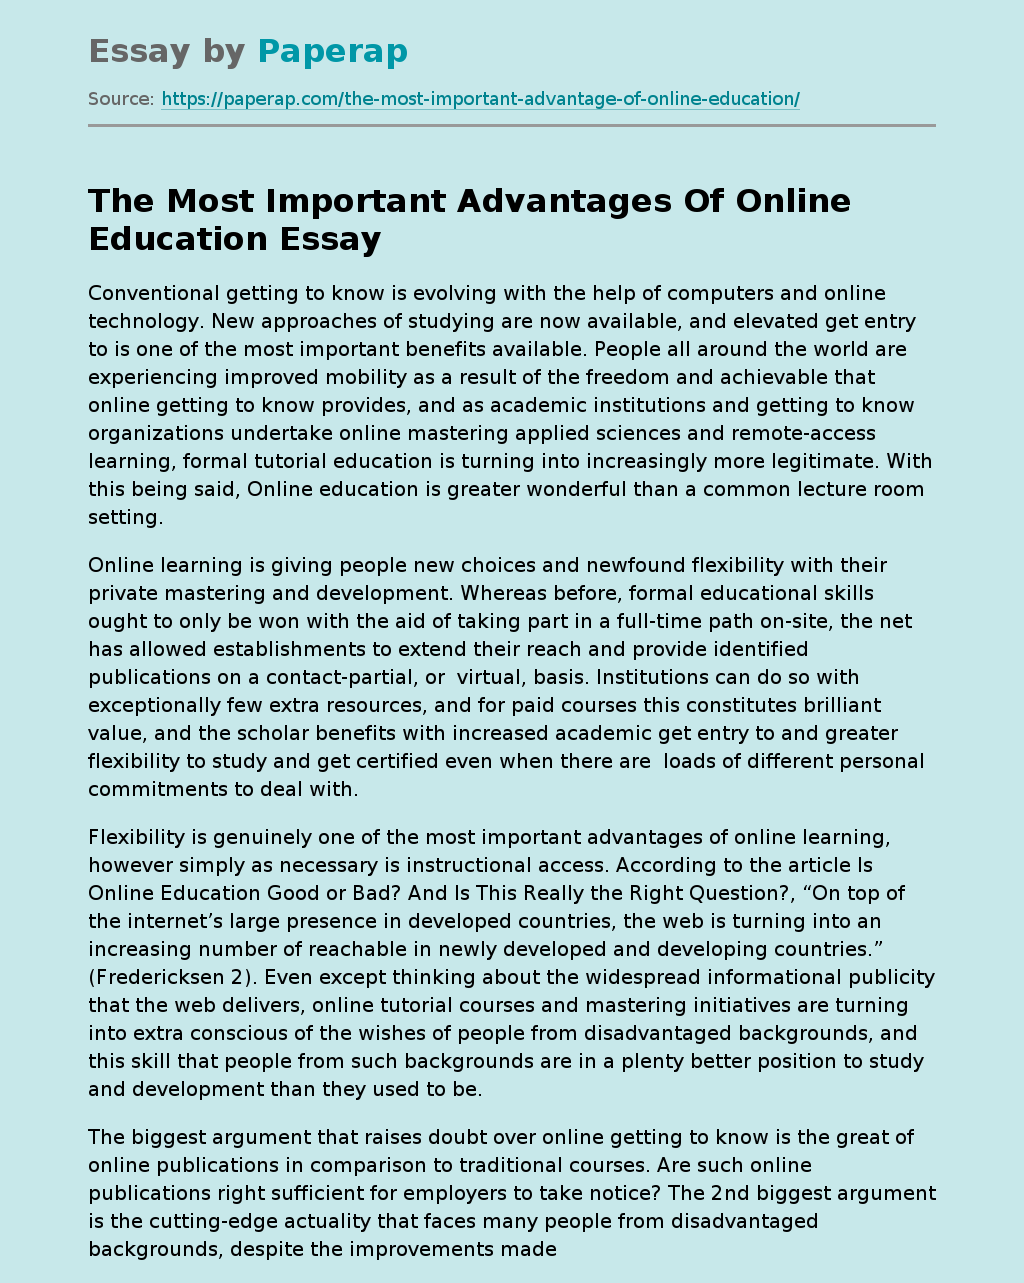 The Most Important Advantages Of Online Education